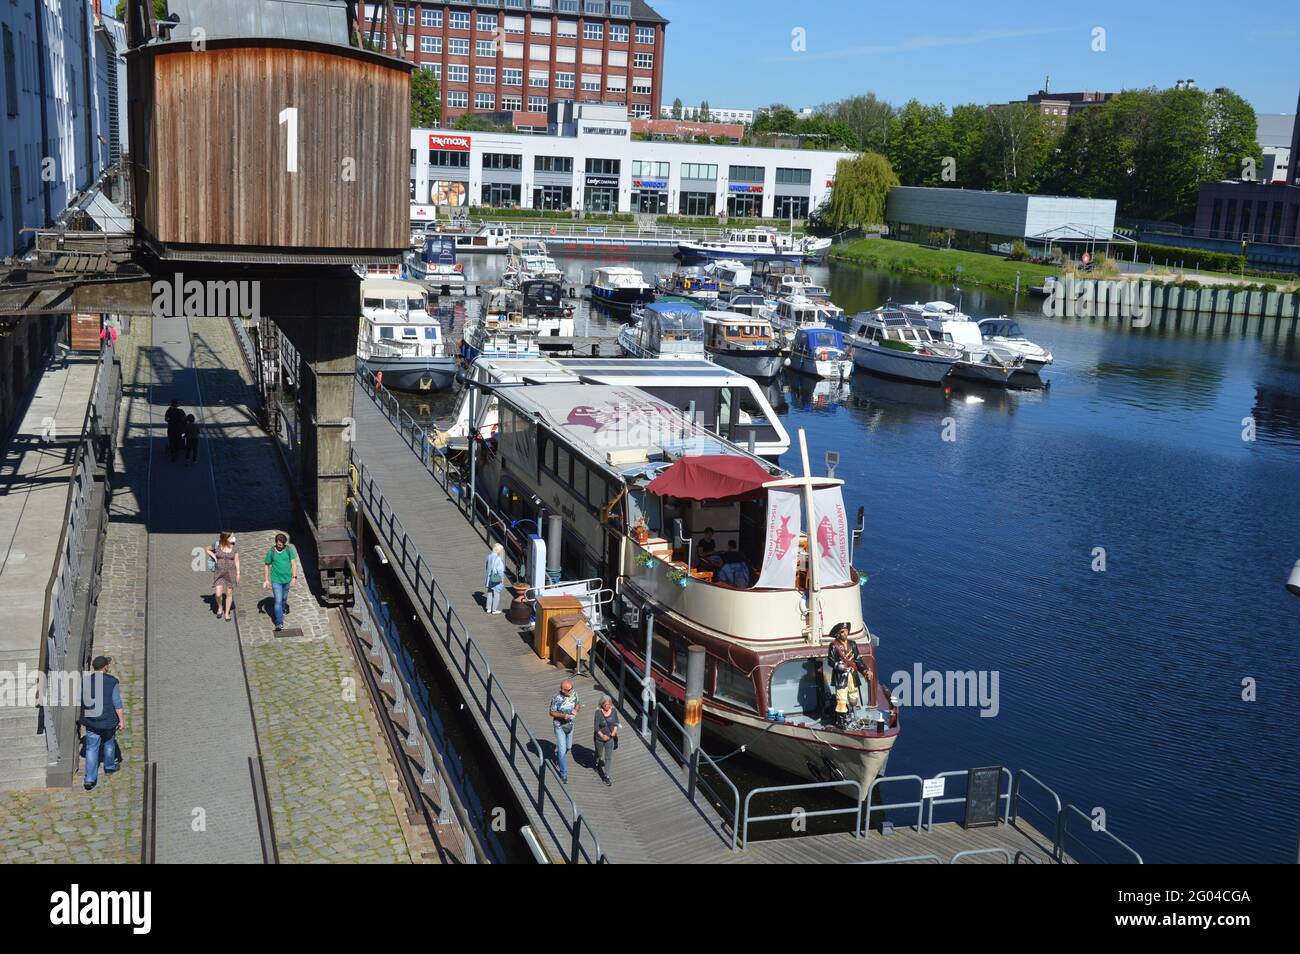 The Tempelhof Harbour in Berlin, Germany - 31st May 2021. Stock Photo